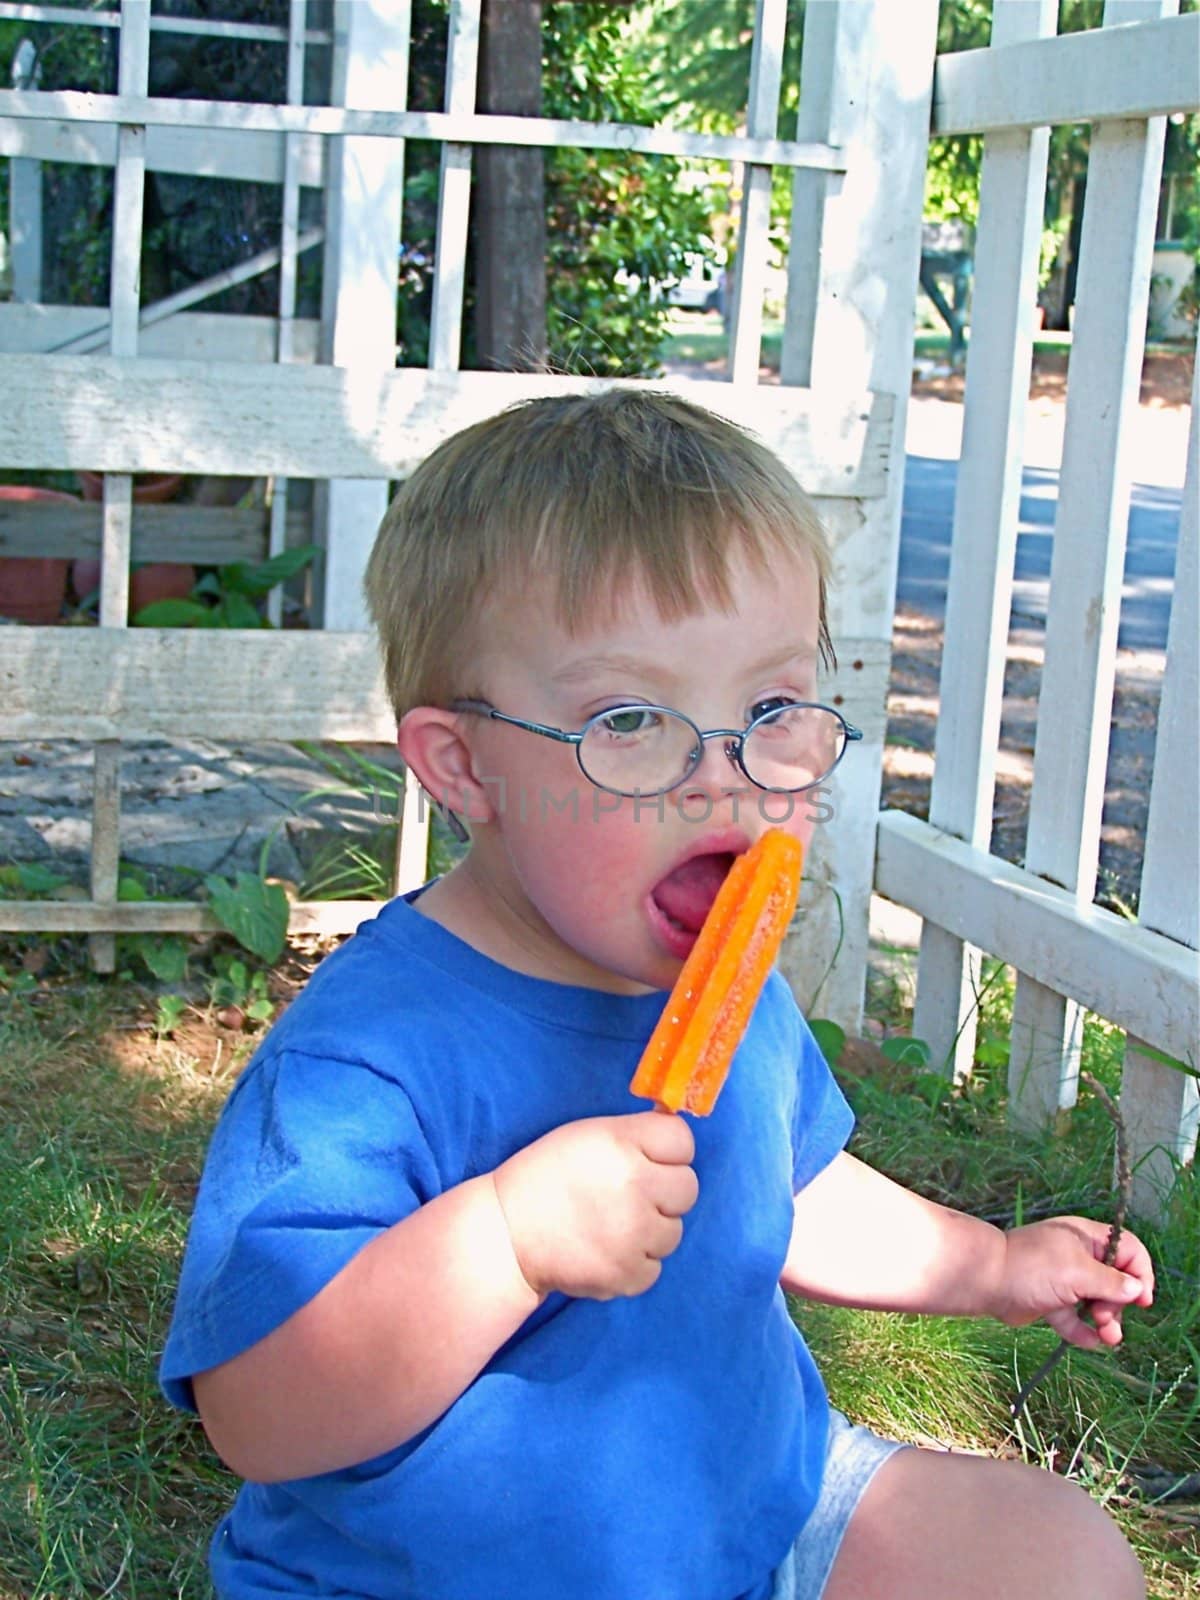 Boy with Downs Syndrome eating a popsicle